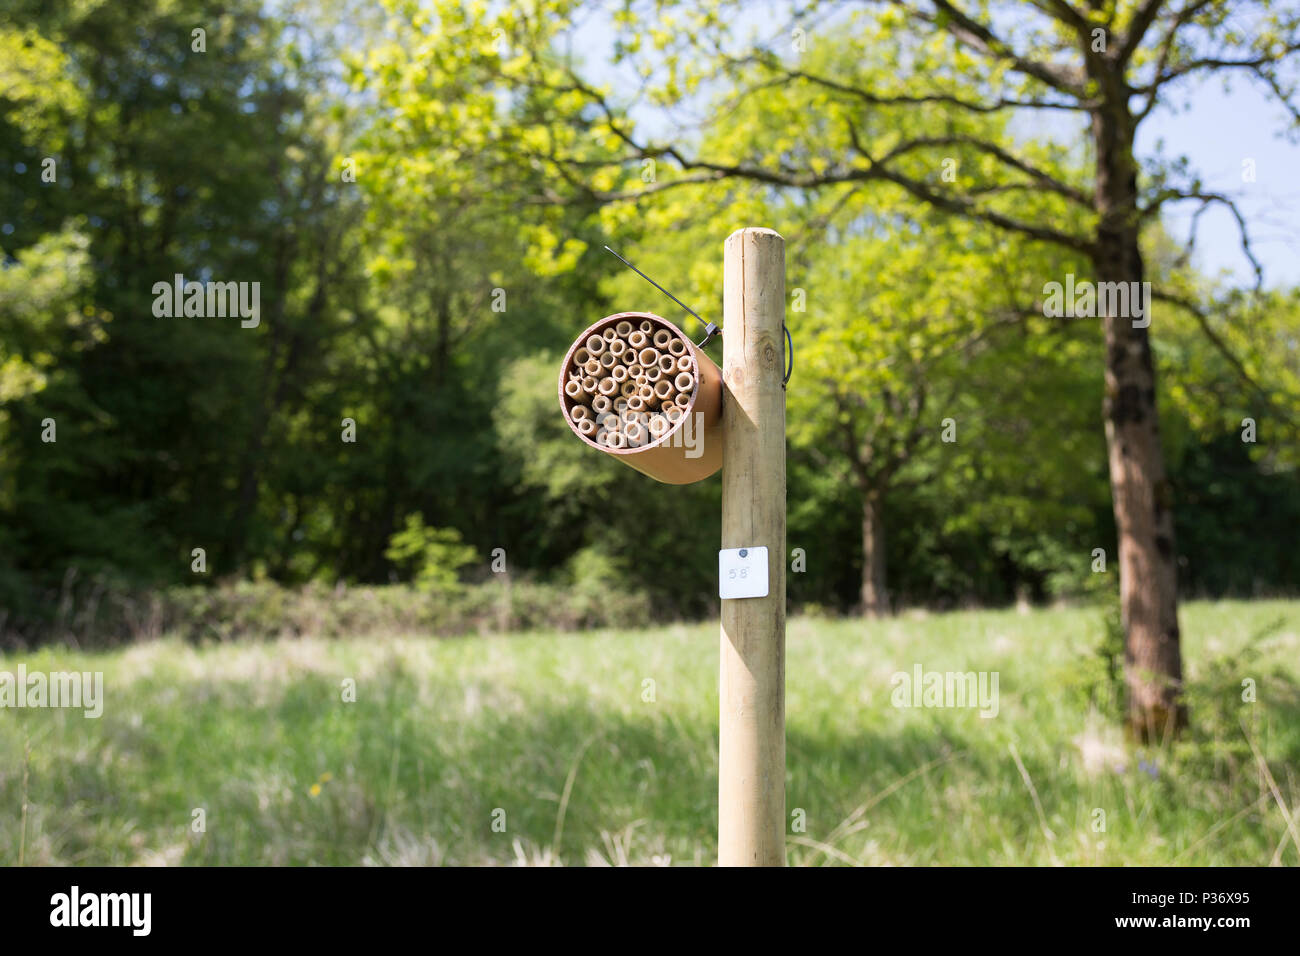 A bee hotel (bee box) in Wytham Woods, Oxfordshire, UK Stock Photo